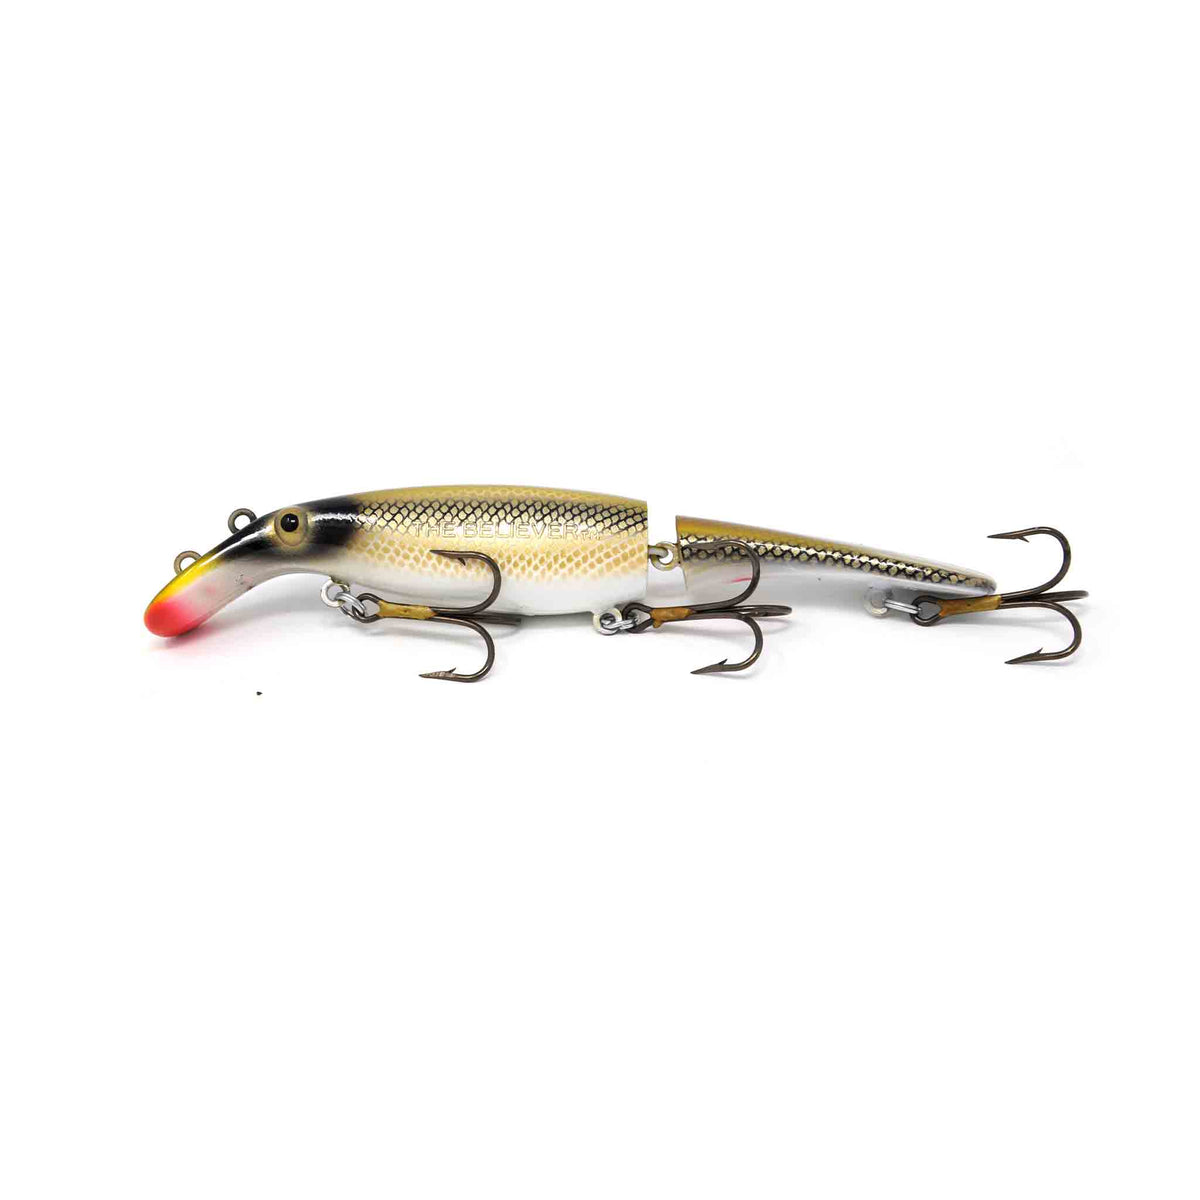 Drifter Tackle Believer Jointed 13 Crankbait